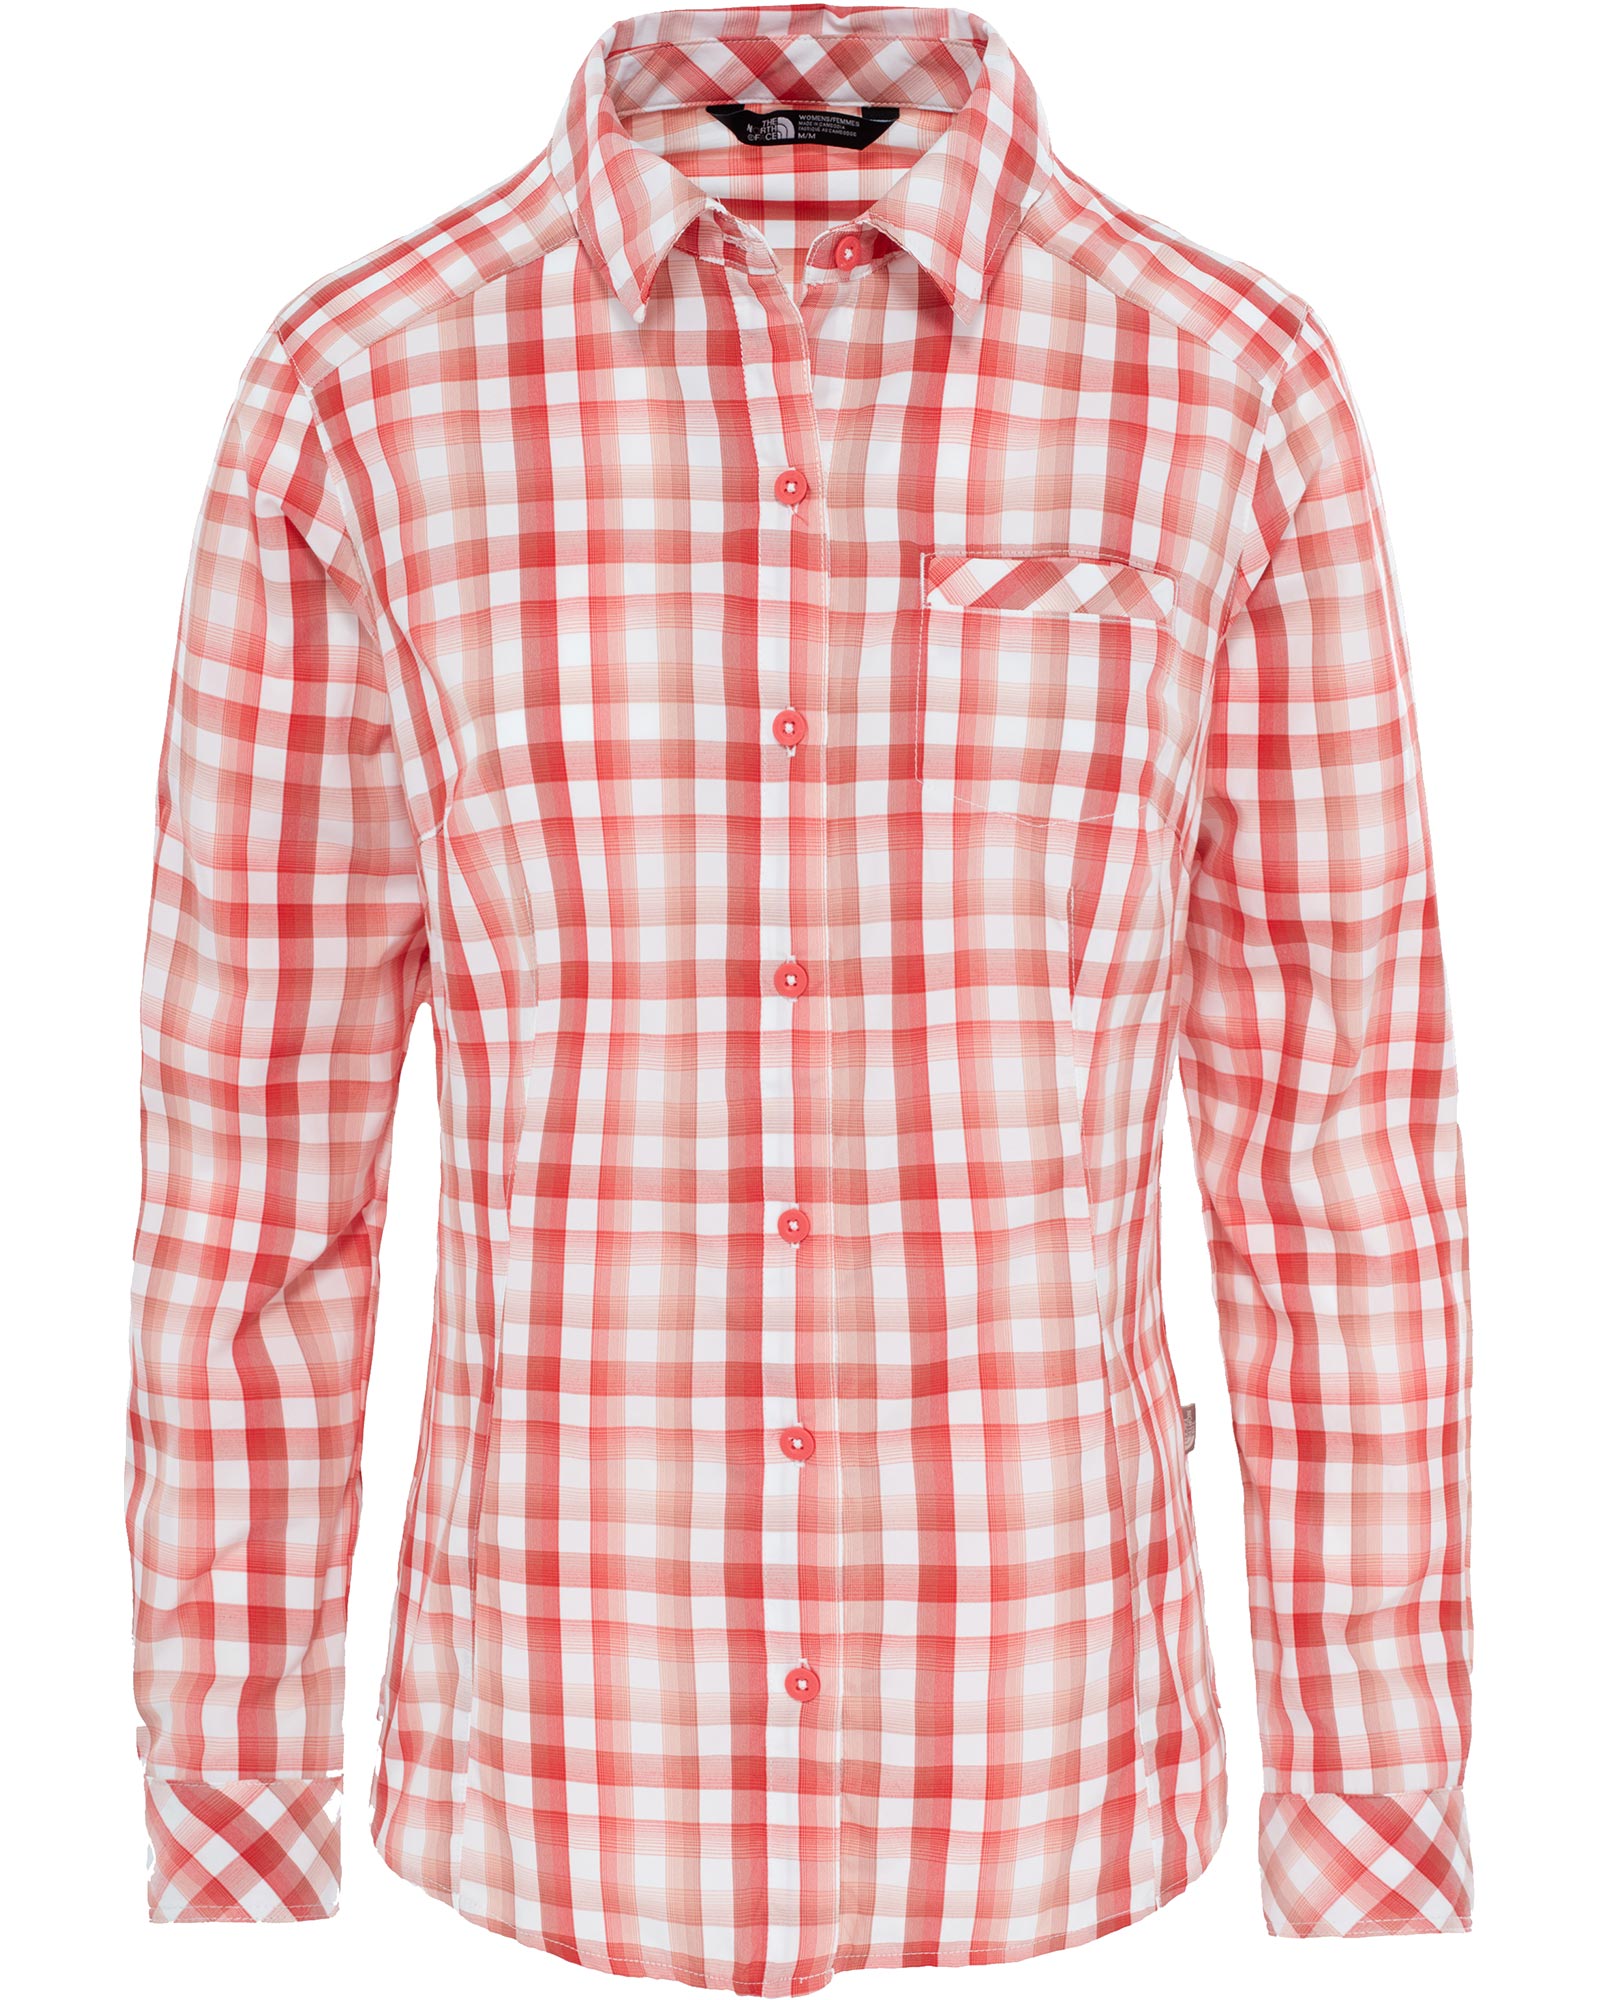 The North Face Zion Women’s Long Sleeve Shirt - Cayenne Red Plaid L